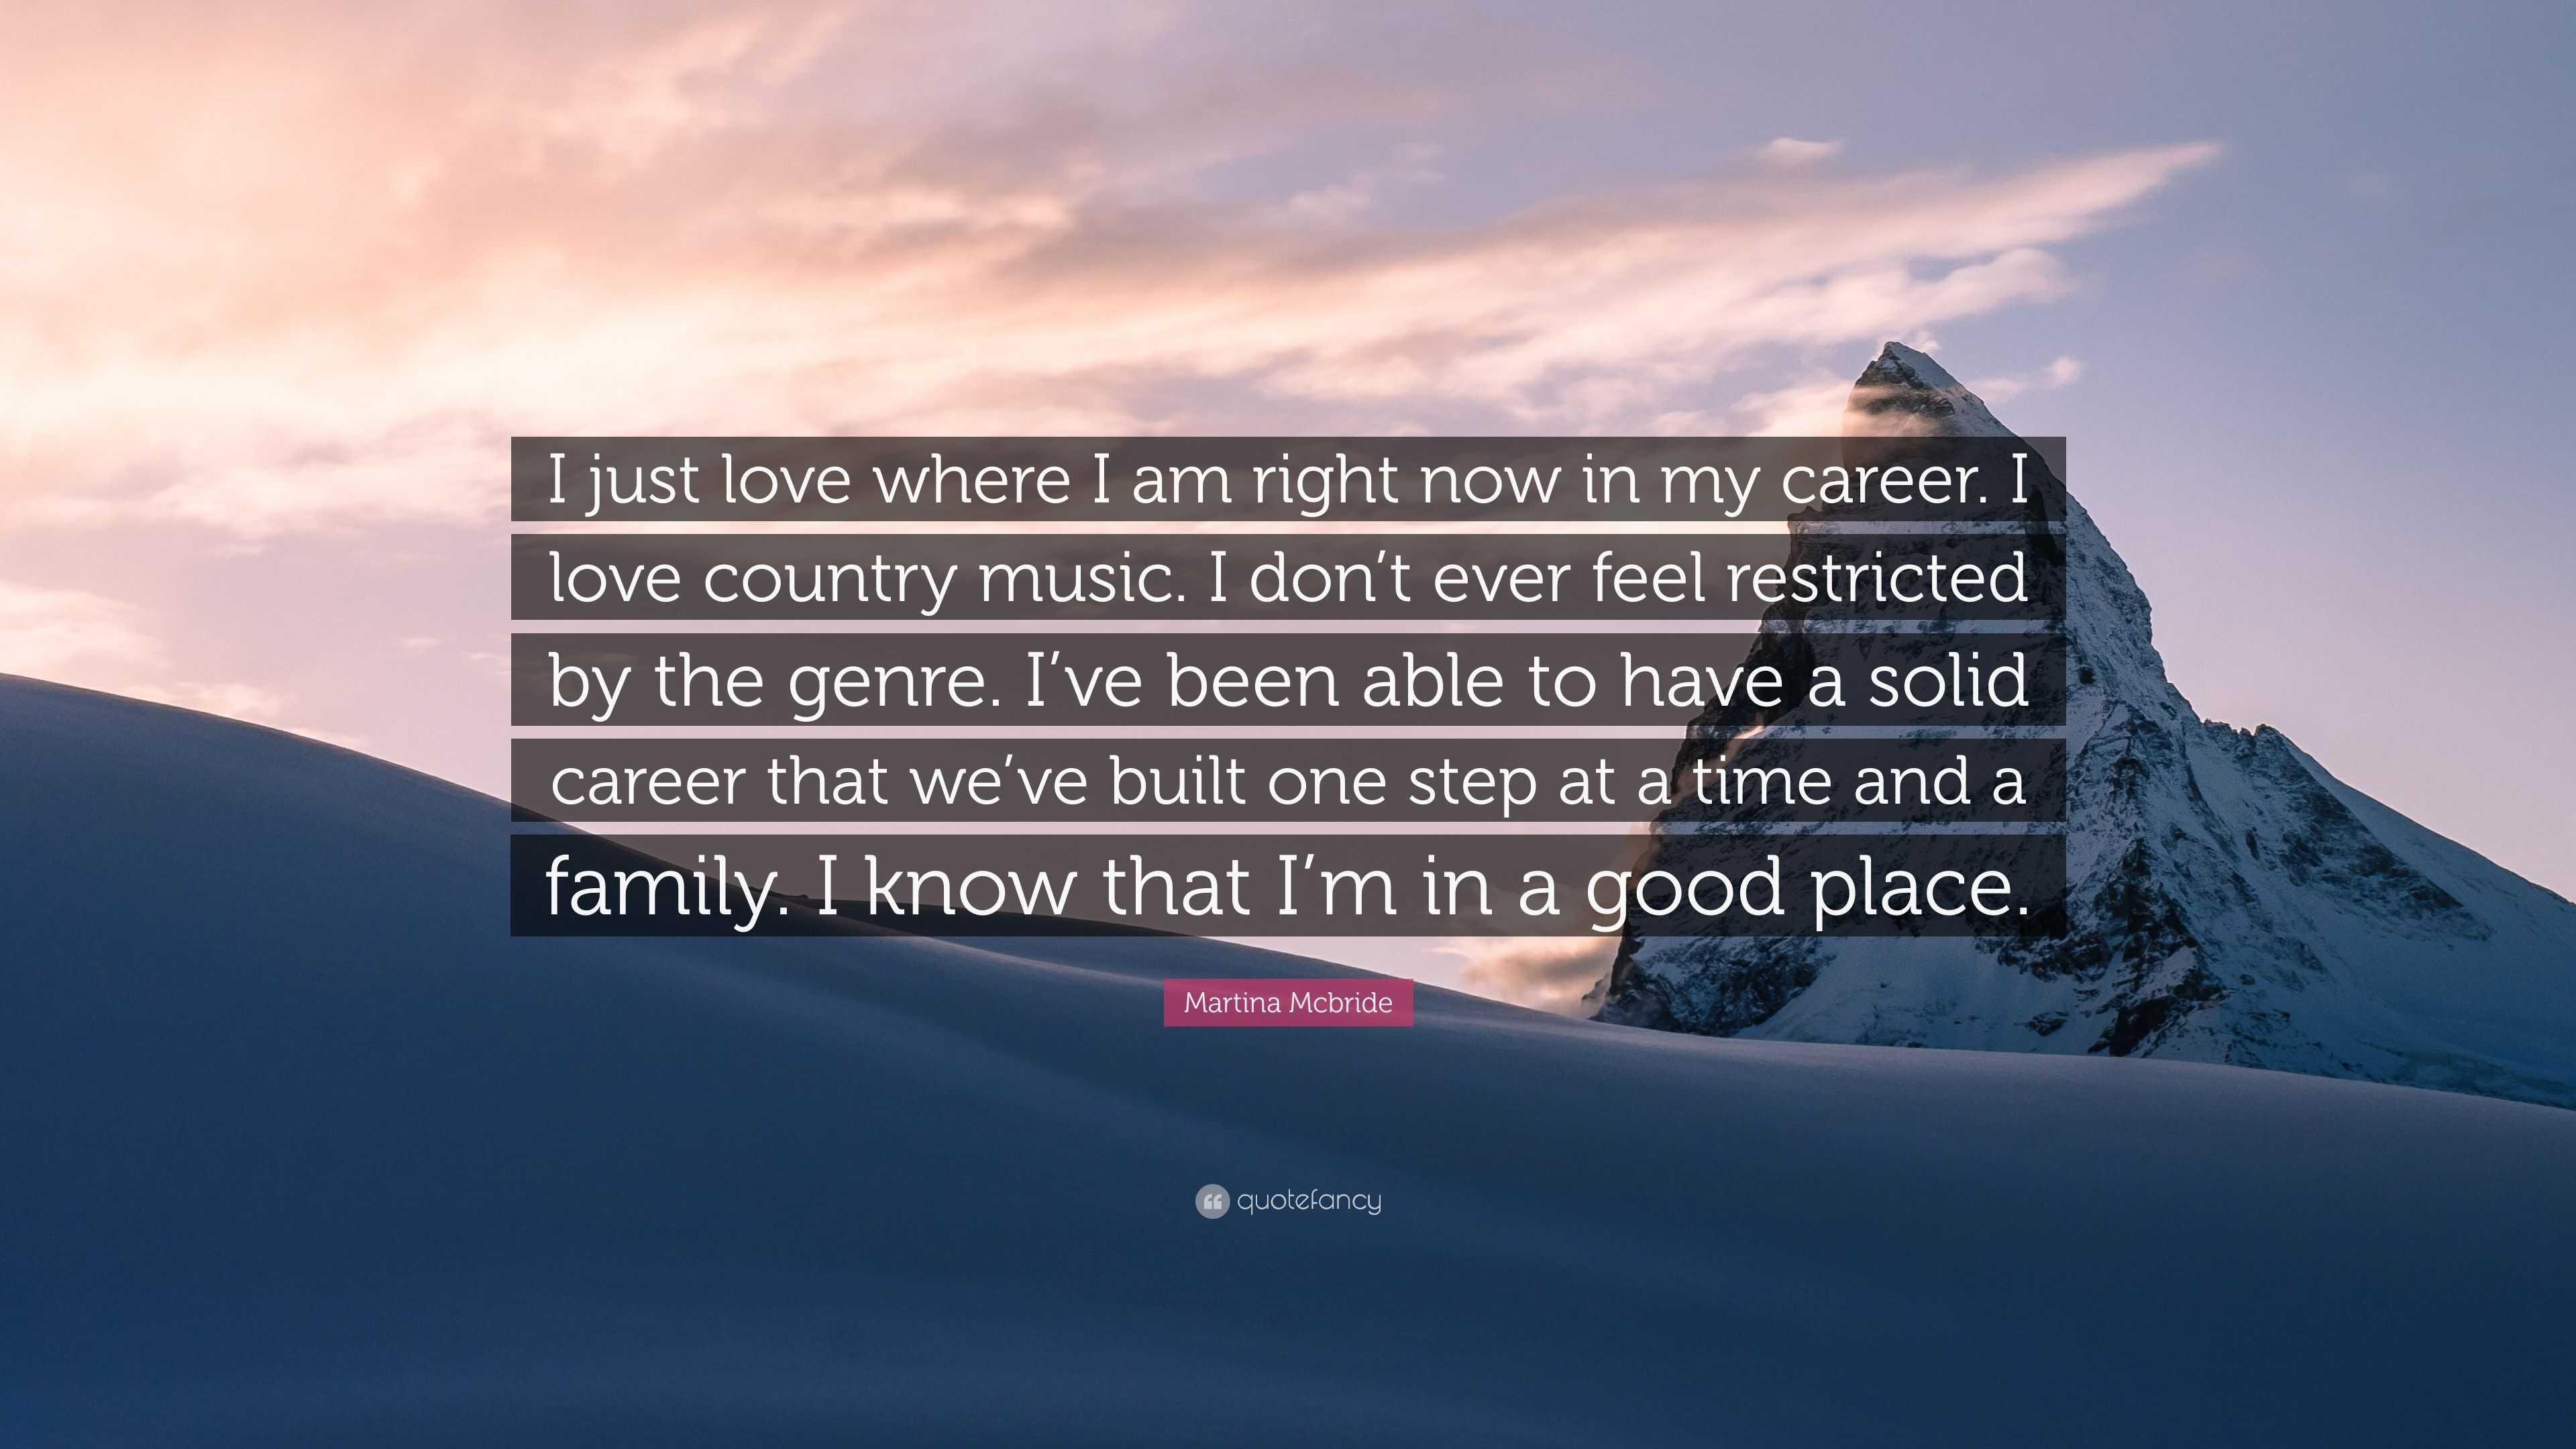 Martina Mcbride Quote “I just love where I am right now in my career